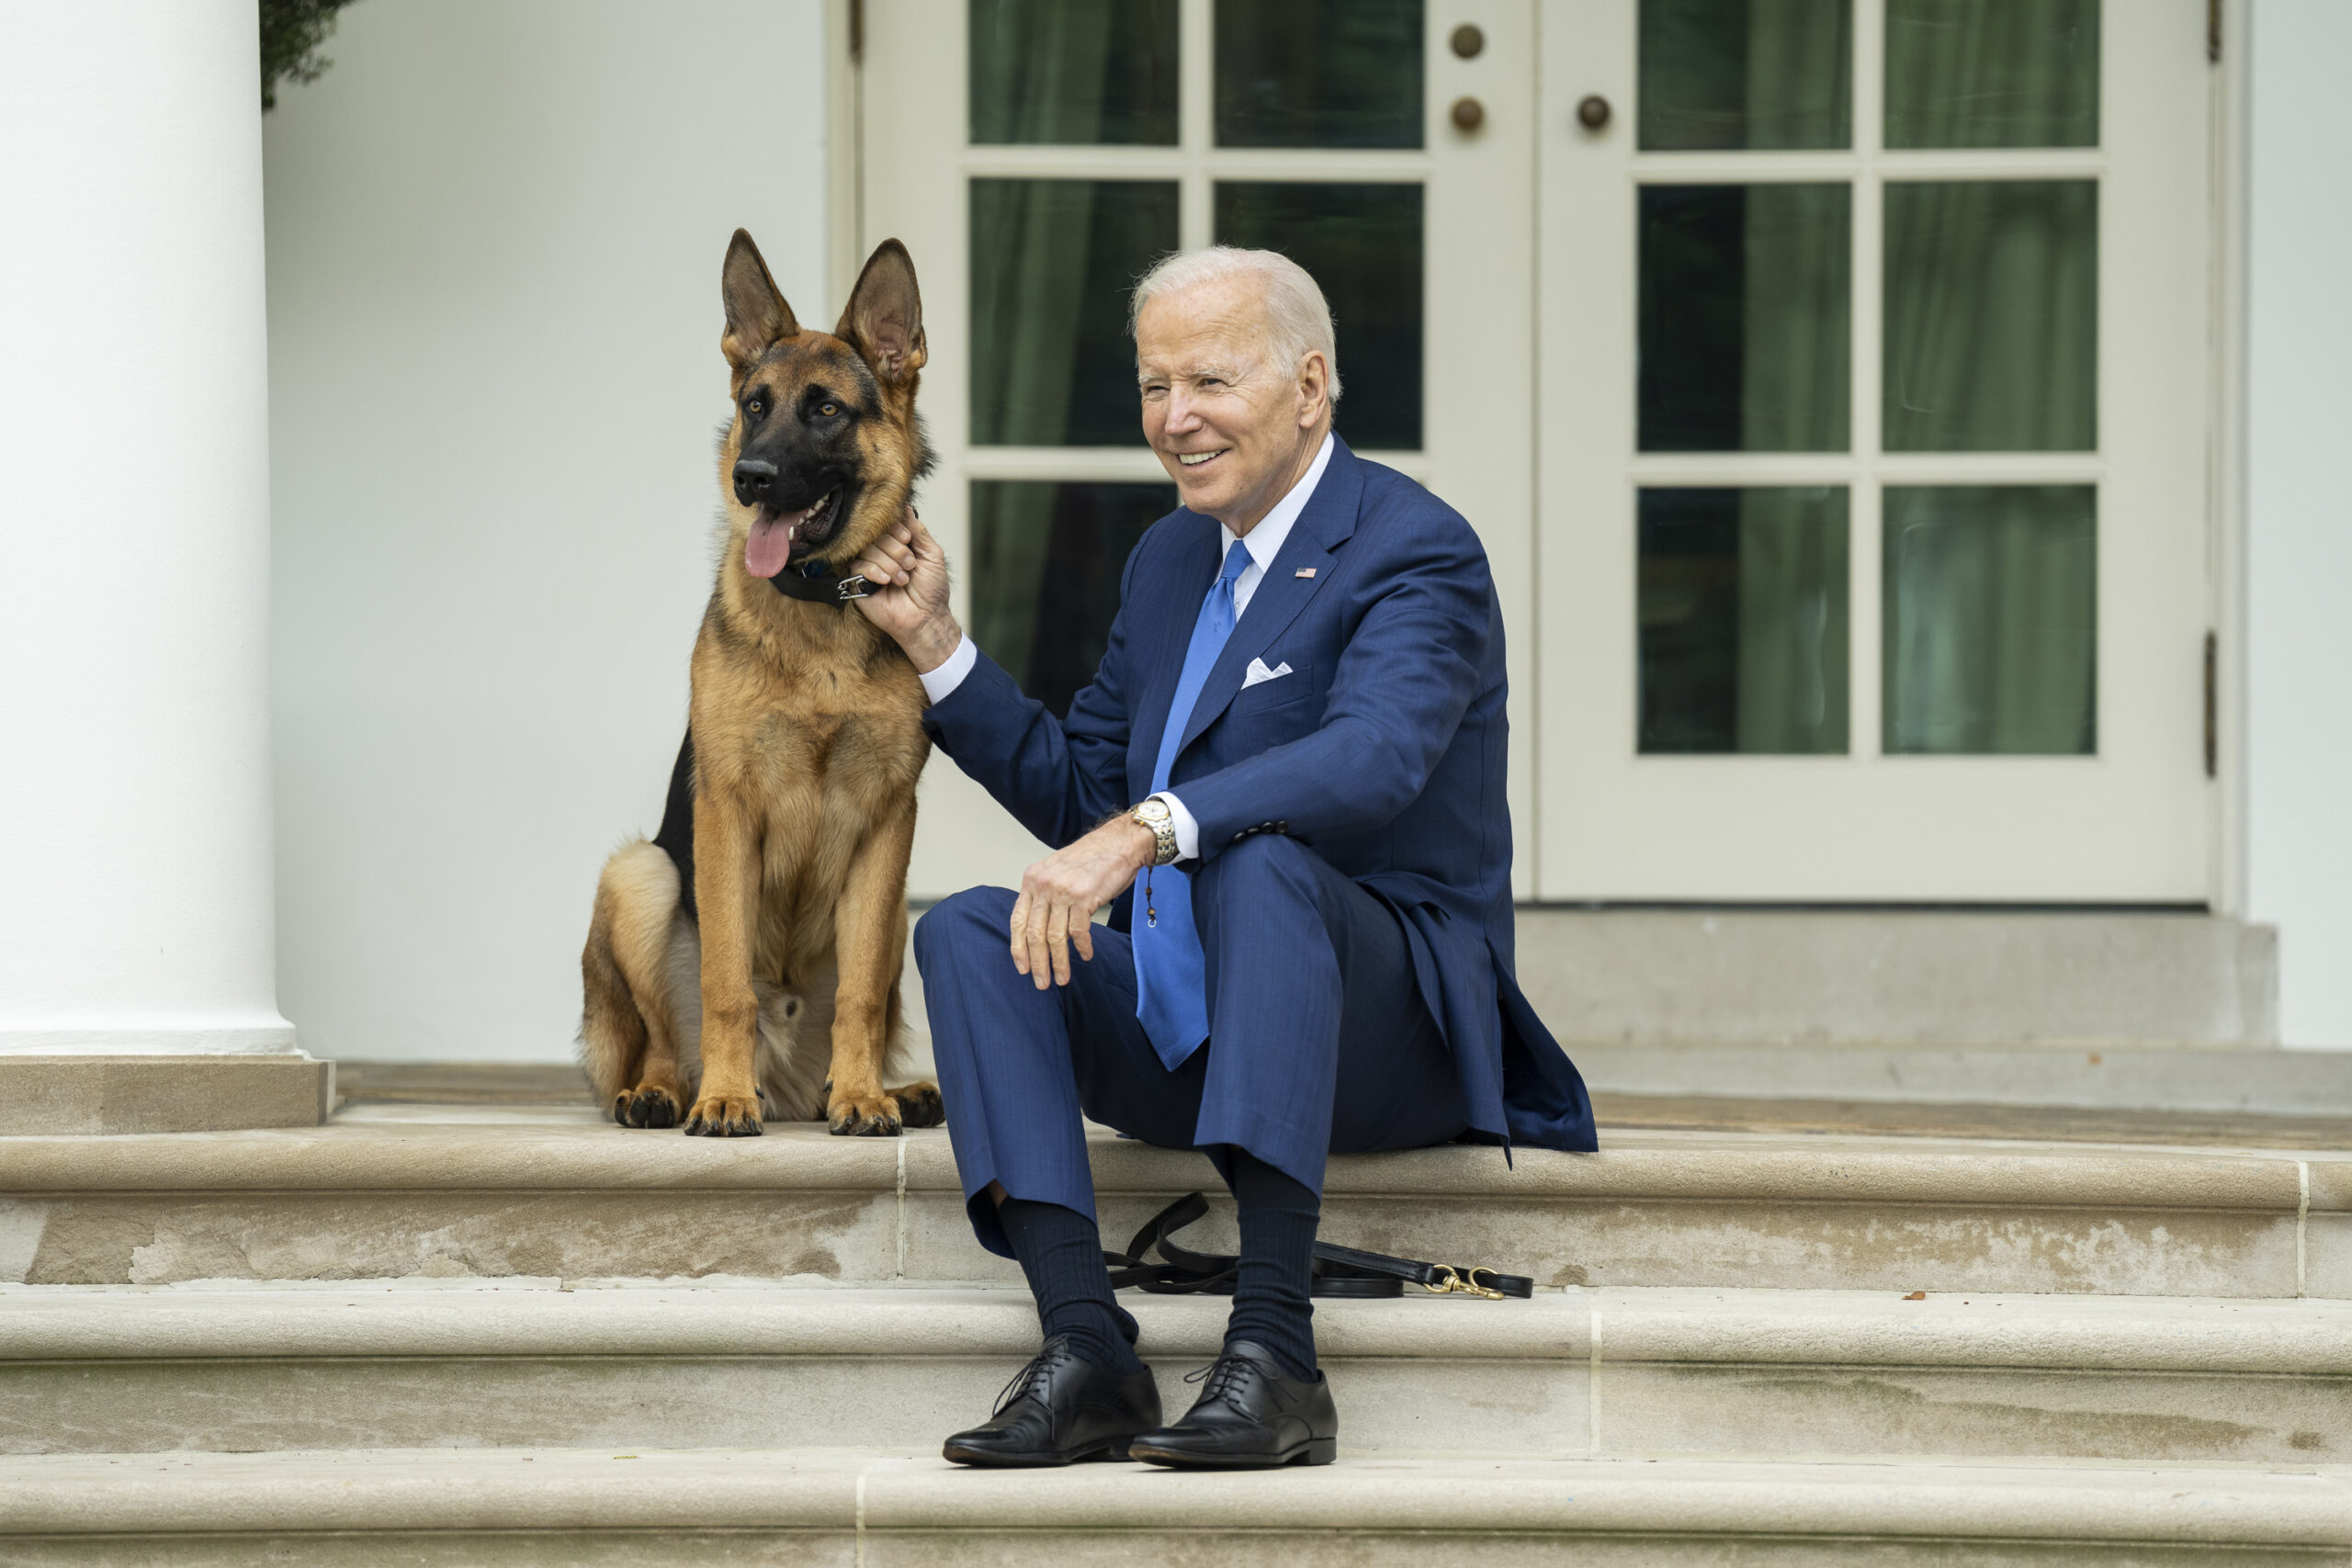 It’s Time For The Biden Family Pet To Be Put Down For Good